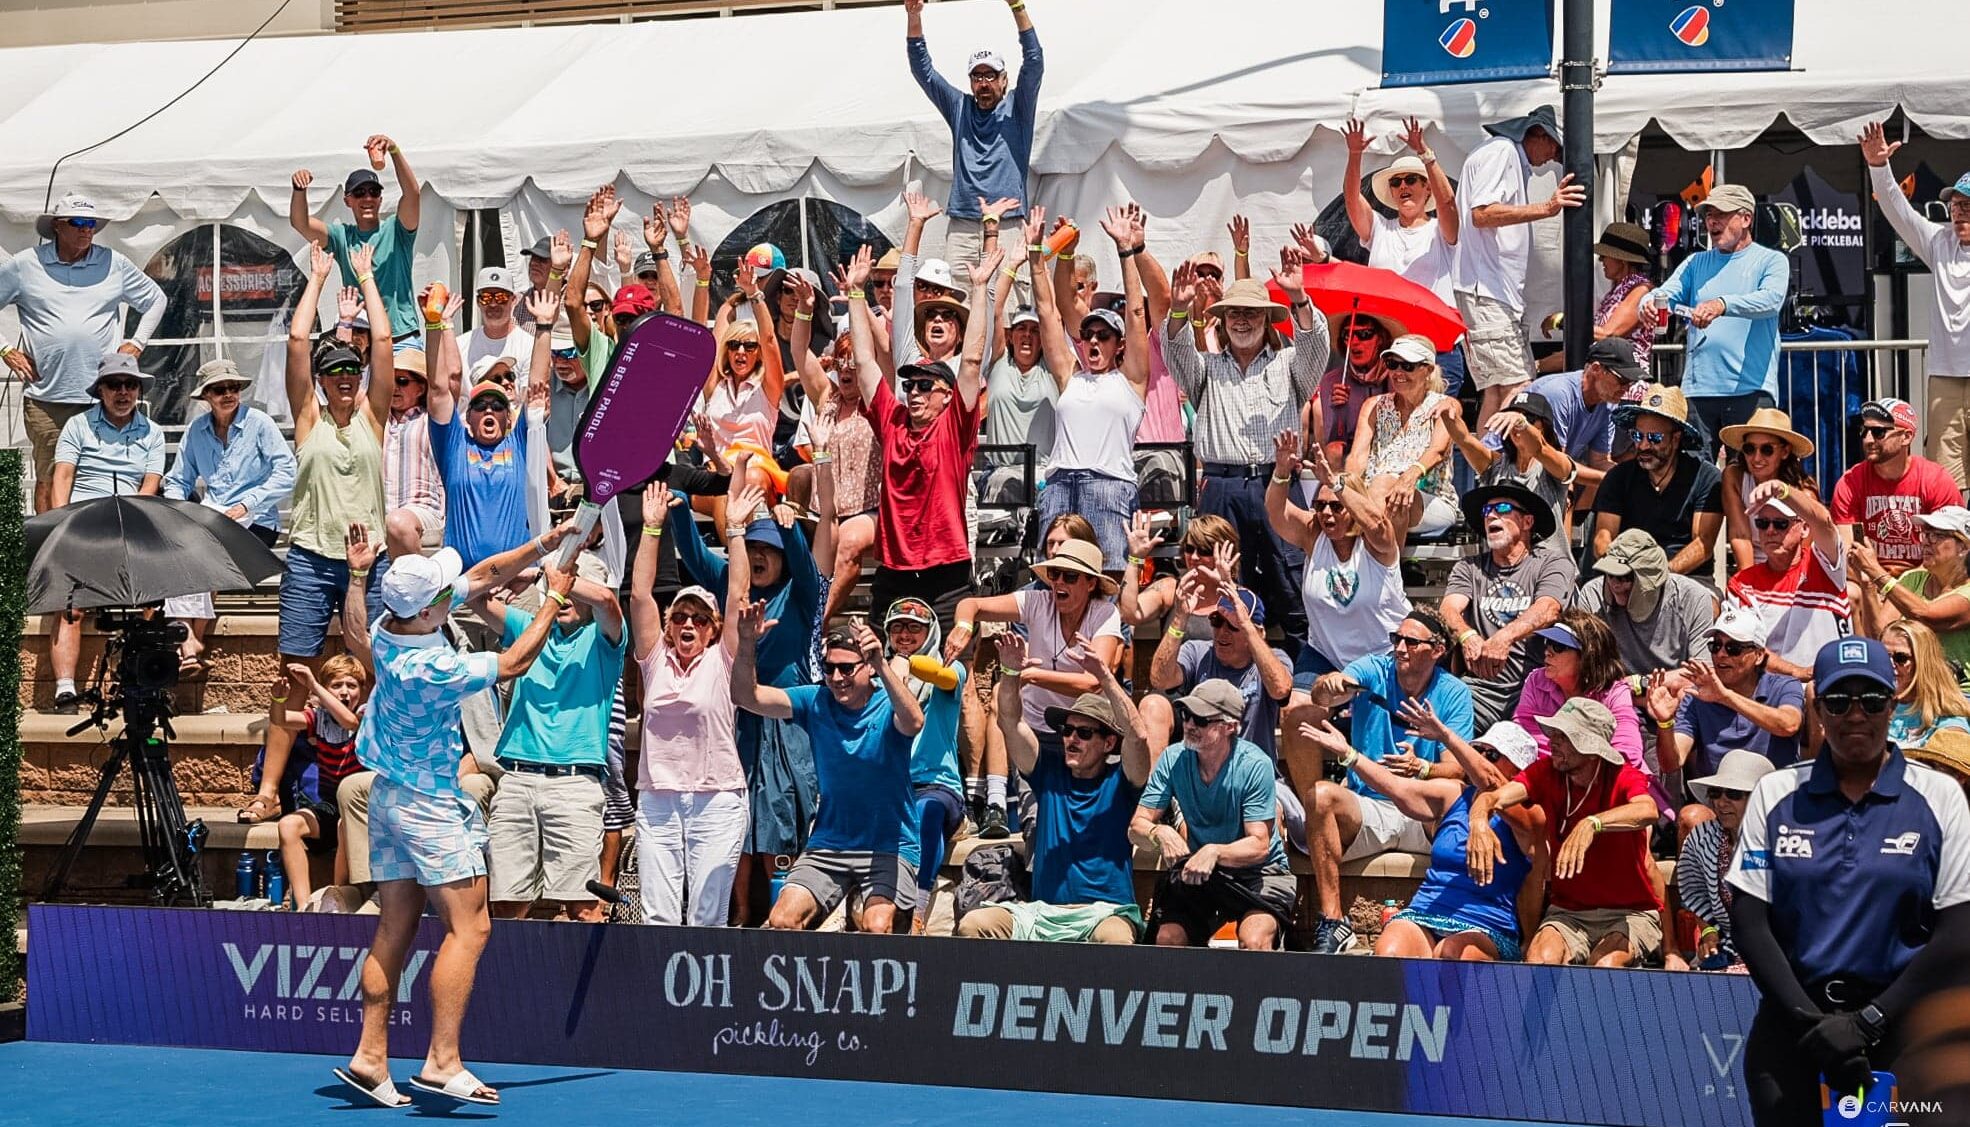 Carvana PPA Tour OH SNAP! Denver Open Presented by Vizzy Crowd